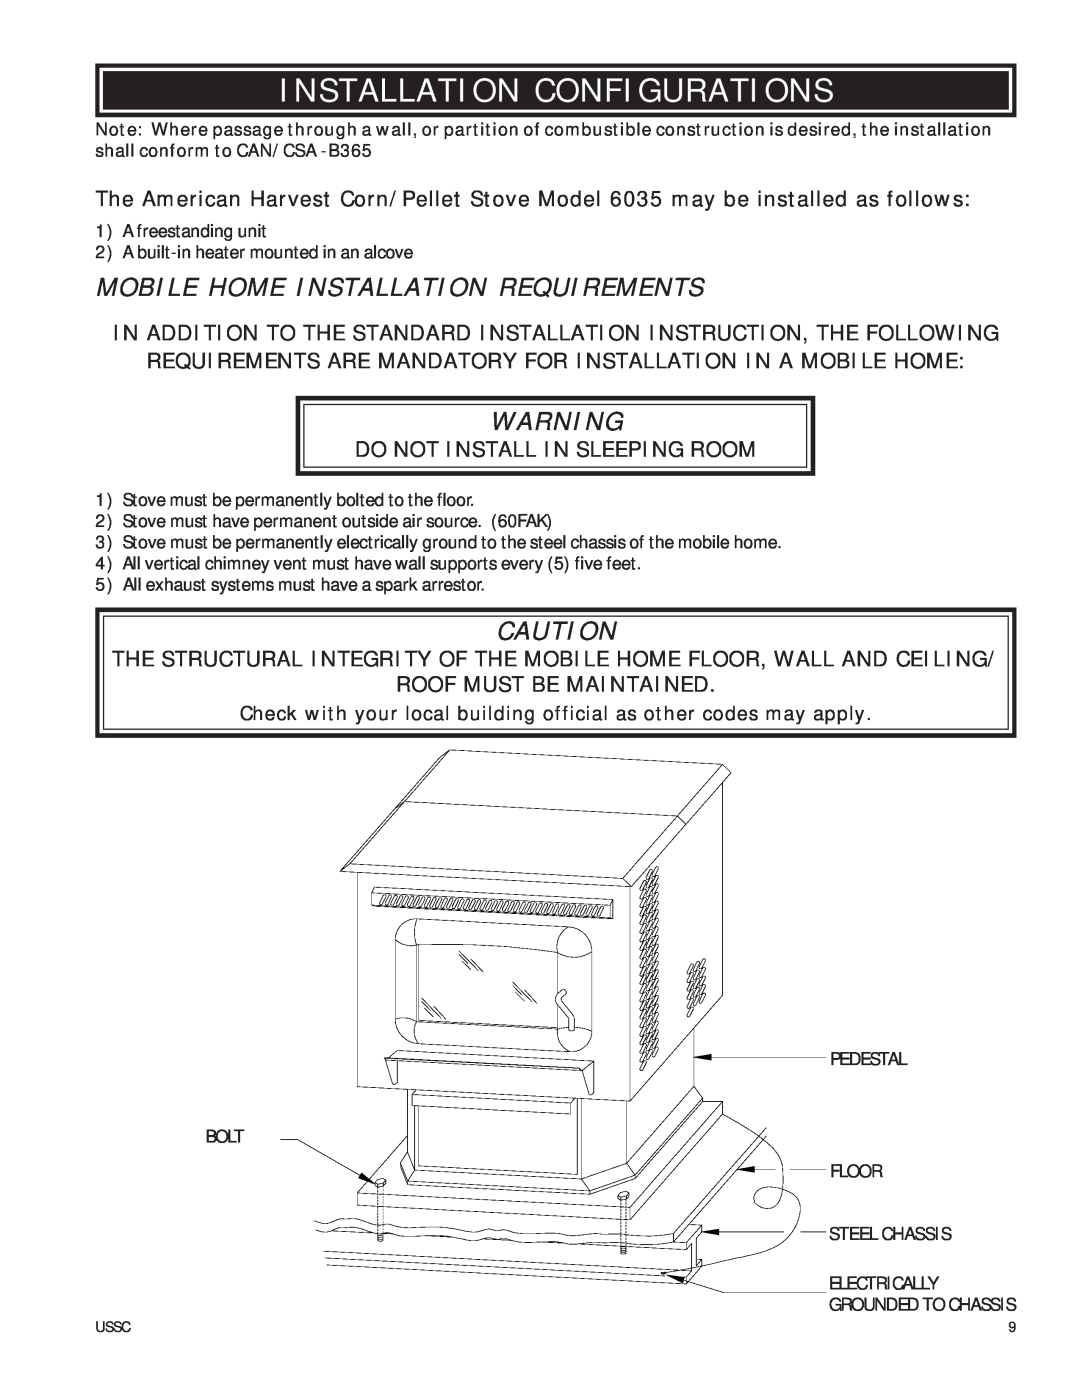 United States Stove 6035 Installation Configurations, Mobile Home Installation Requirements, Roof Must Be Maintained 